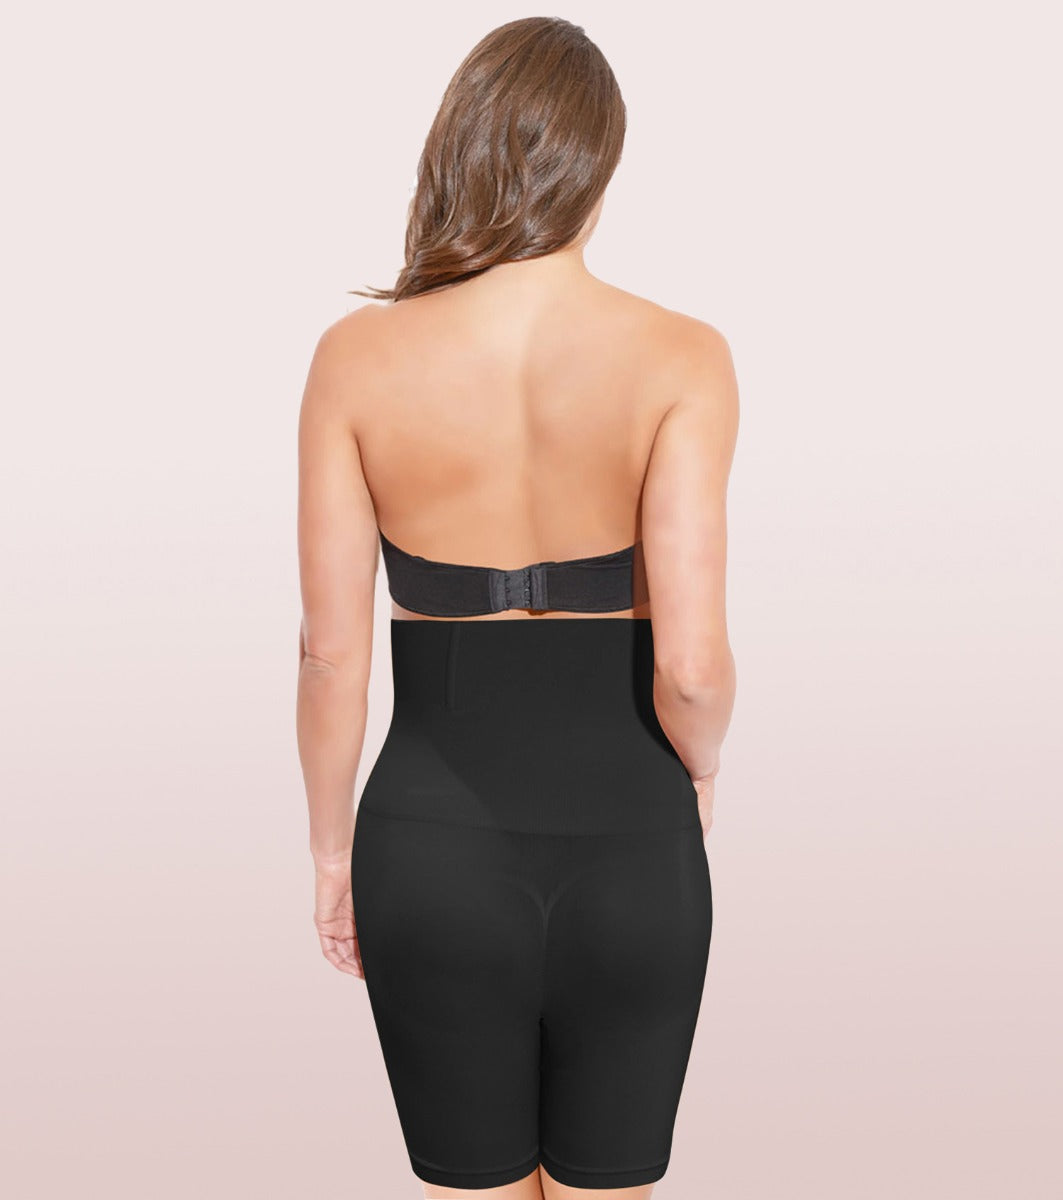 High compression mid-thigh strapless shaper